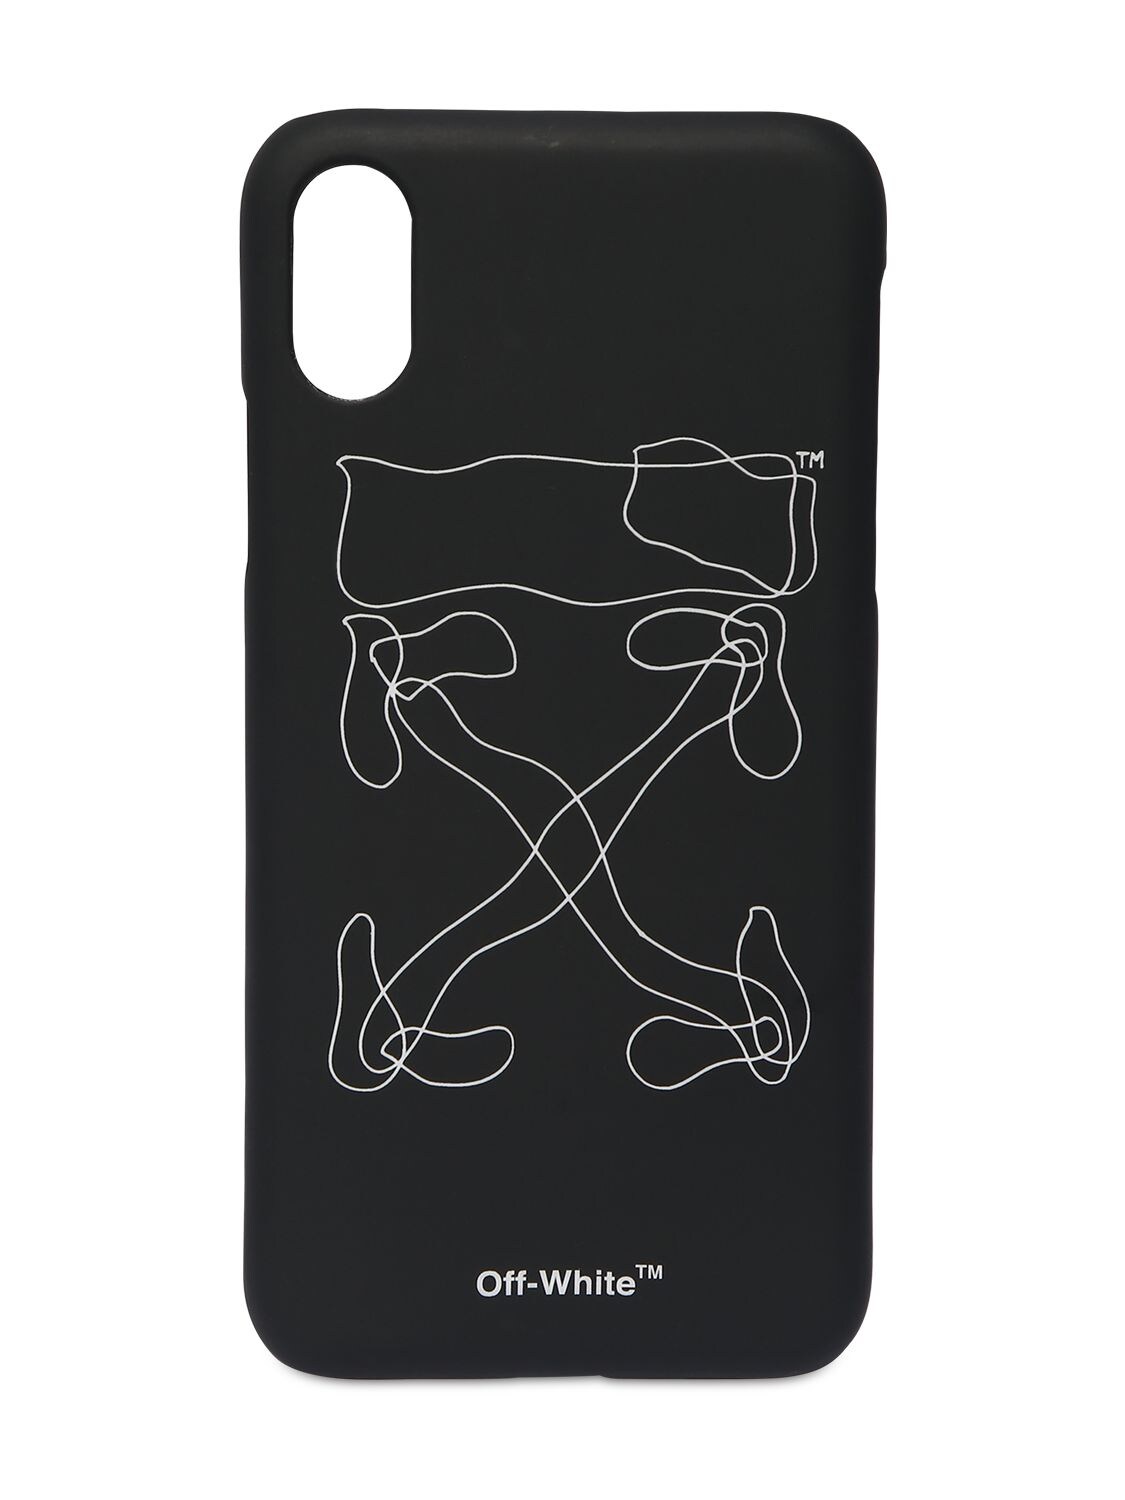 OFF-WHITE “ABSTRACT ARROWS”IPHONE X/XS手机壳,70IJS5024-MTAWMQ2